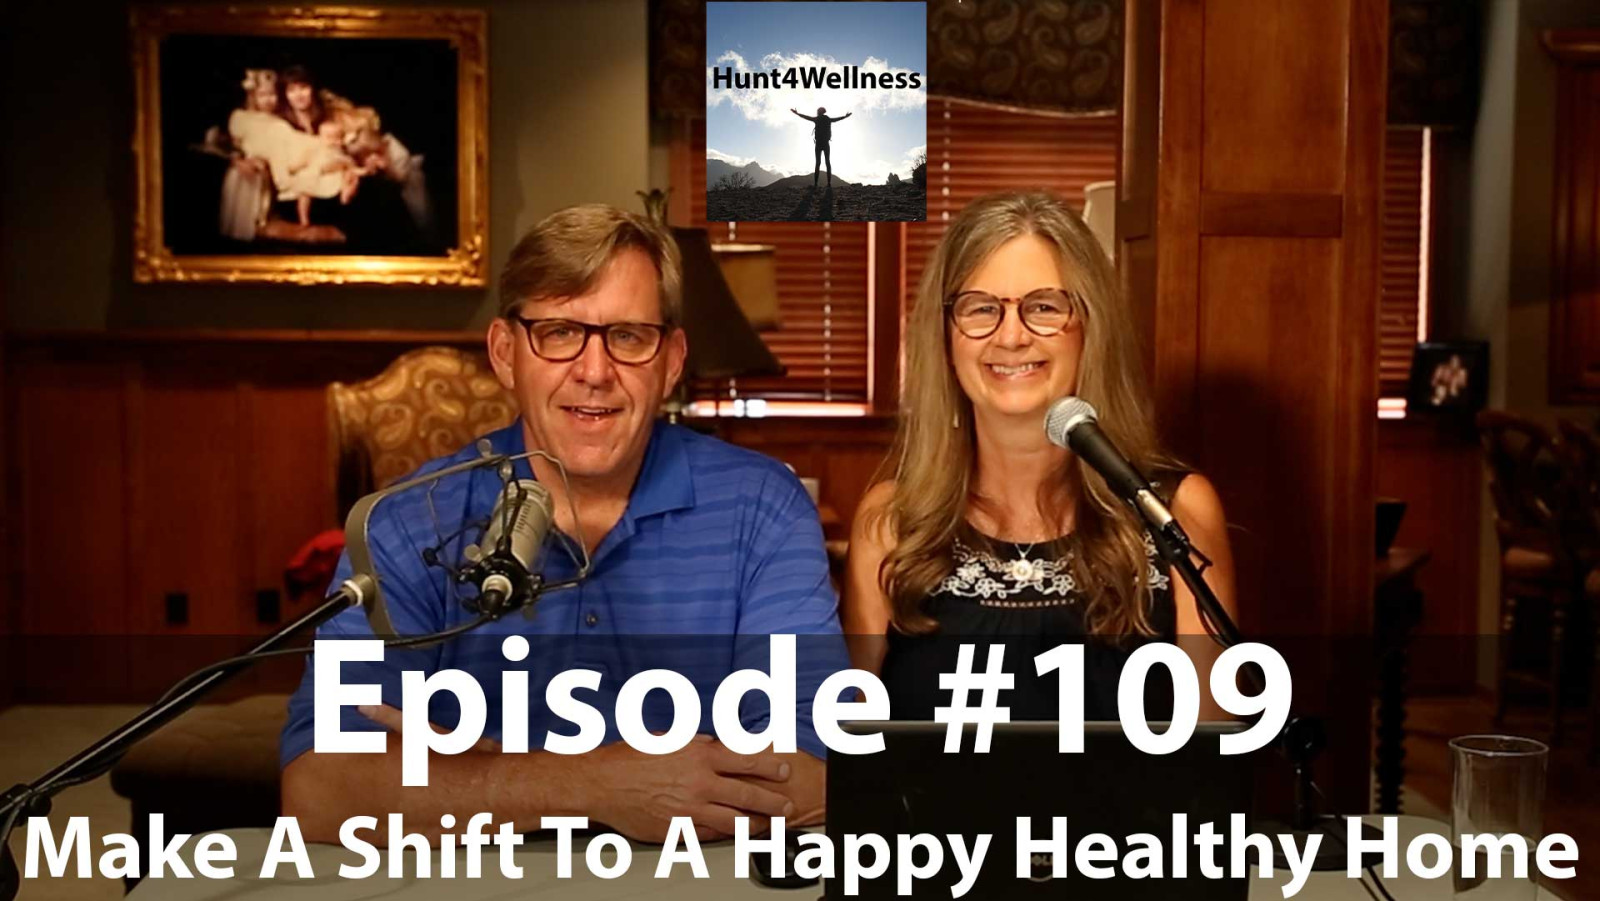 Episode #109 - Make A Shift To A Happy Healthy Home